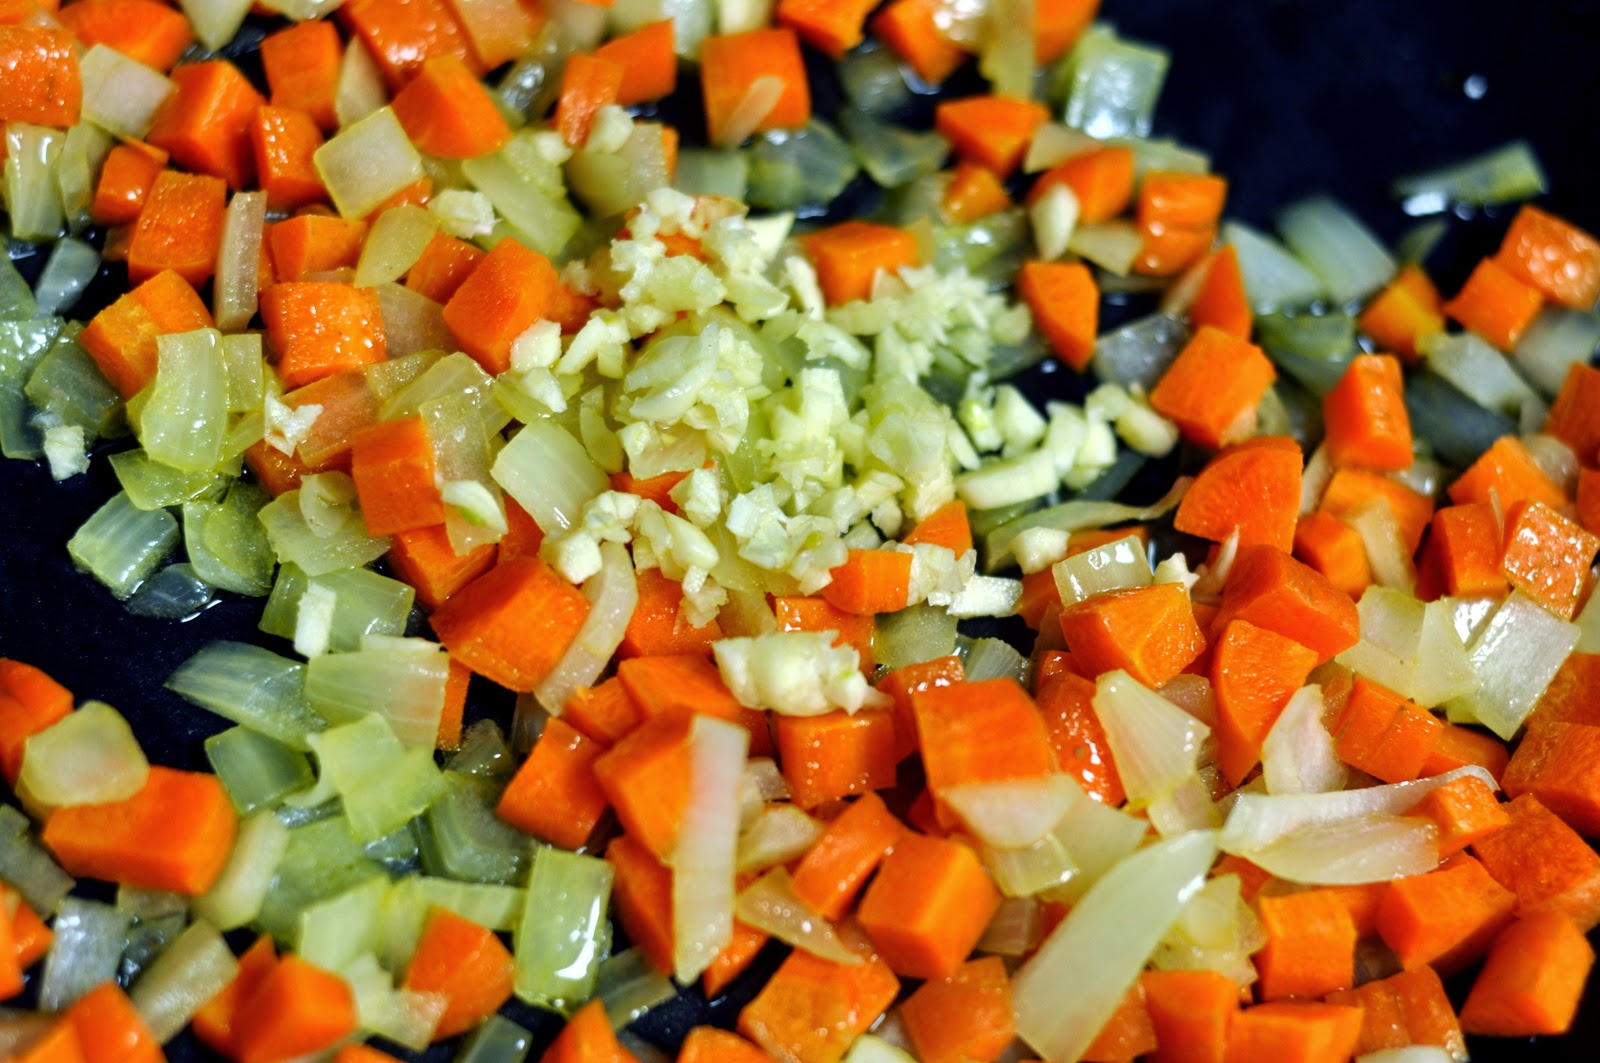 Chopped Carrot and Onions with Minced Garlic | Taste As You Go